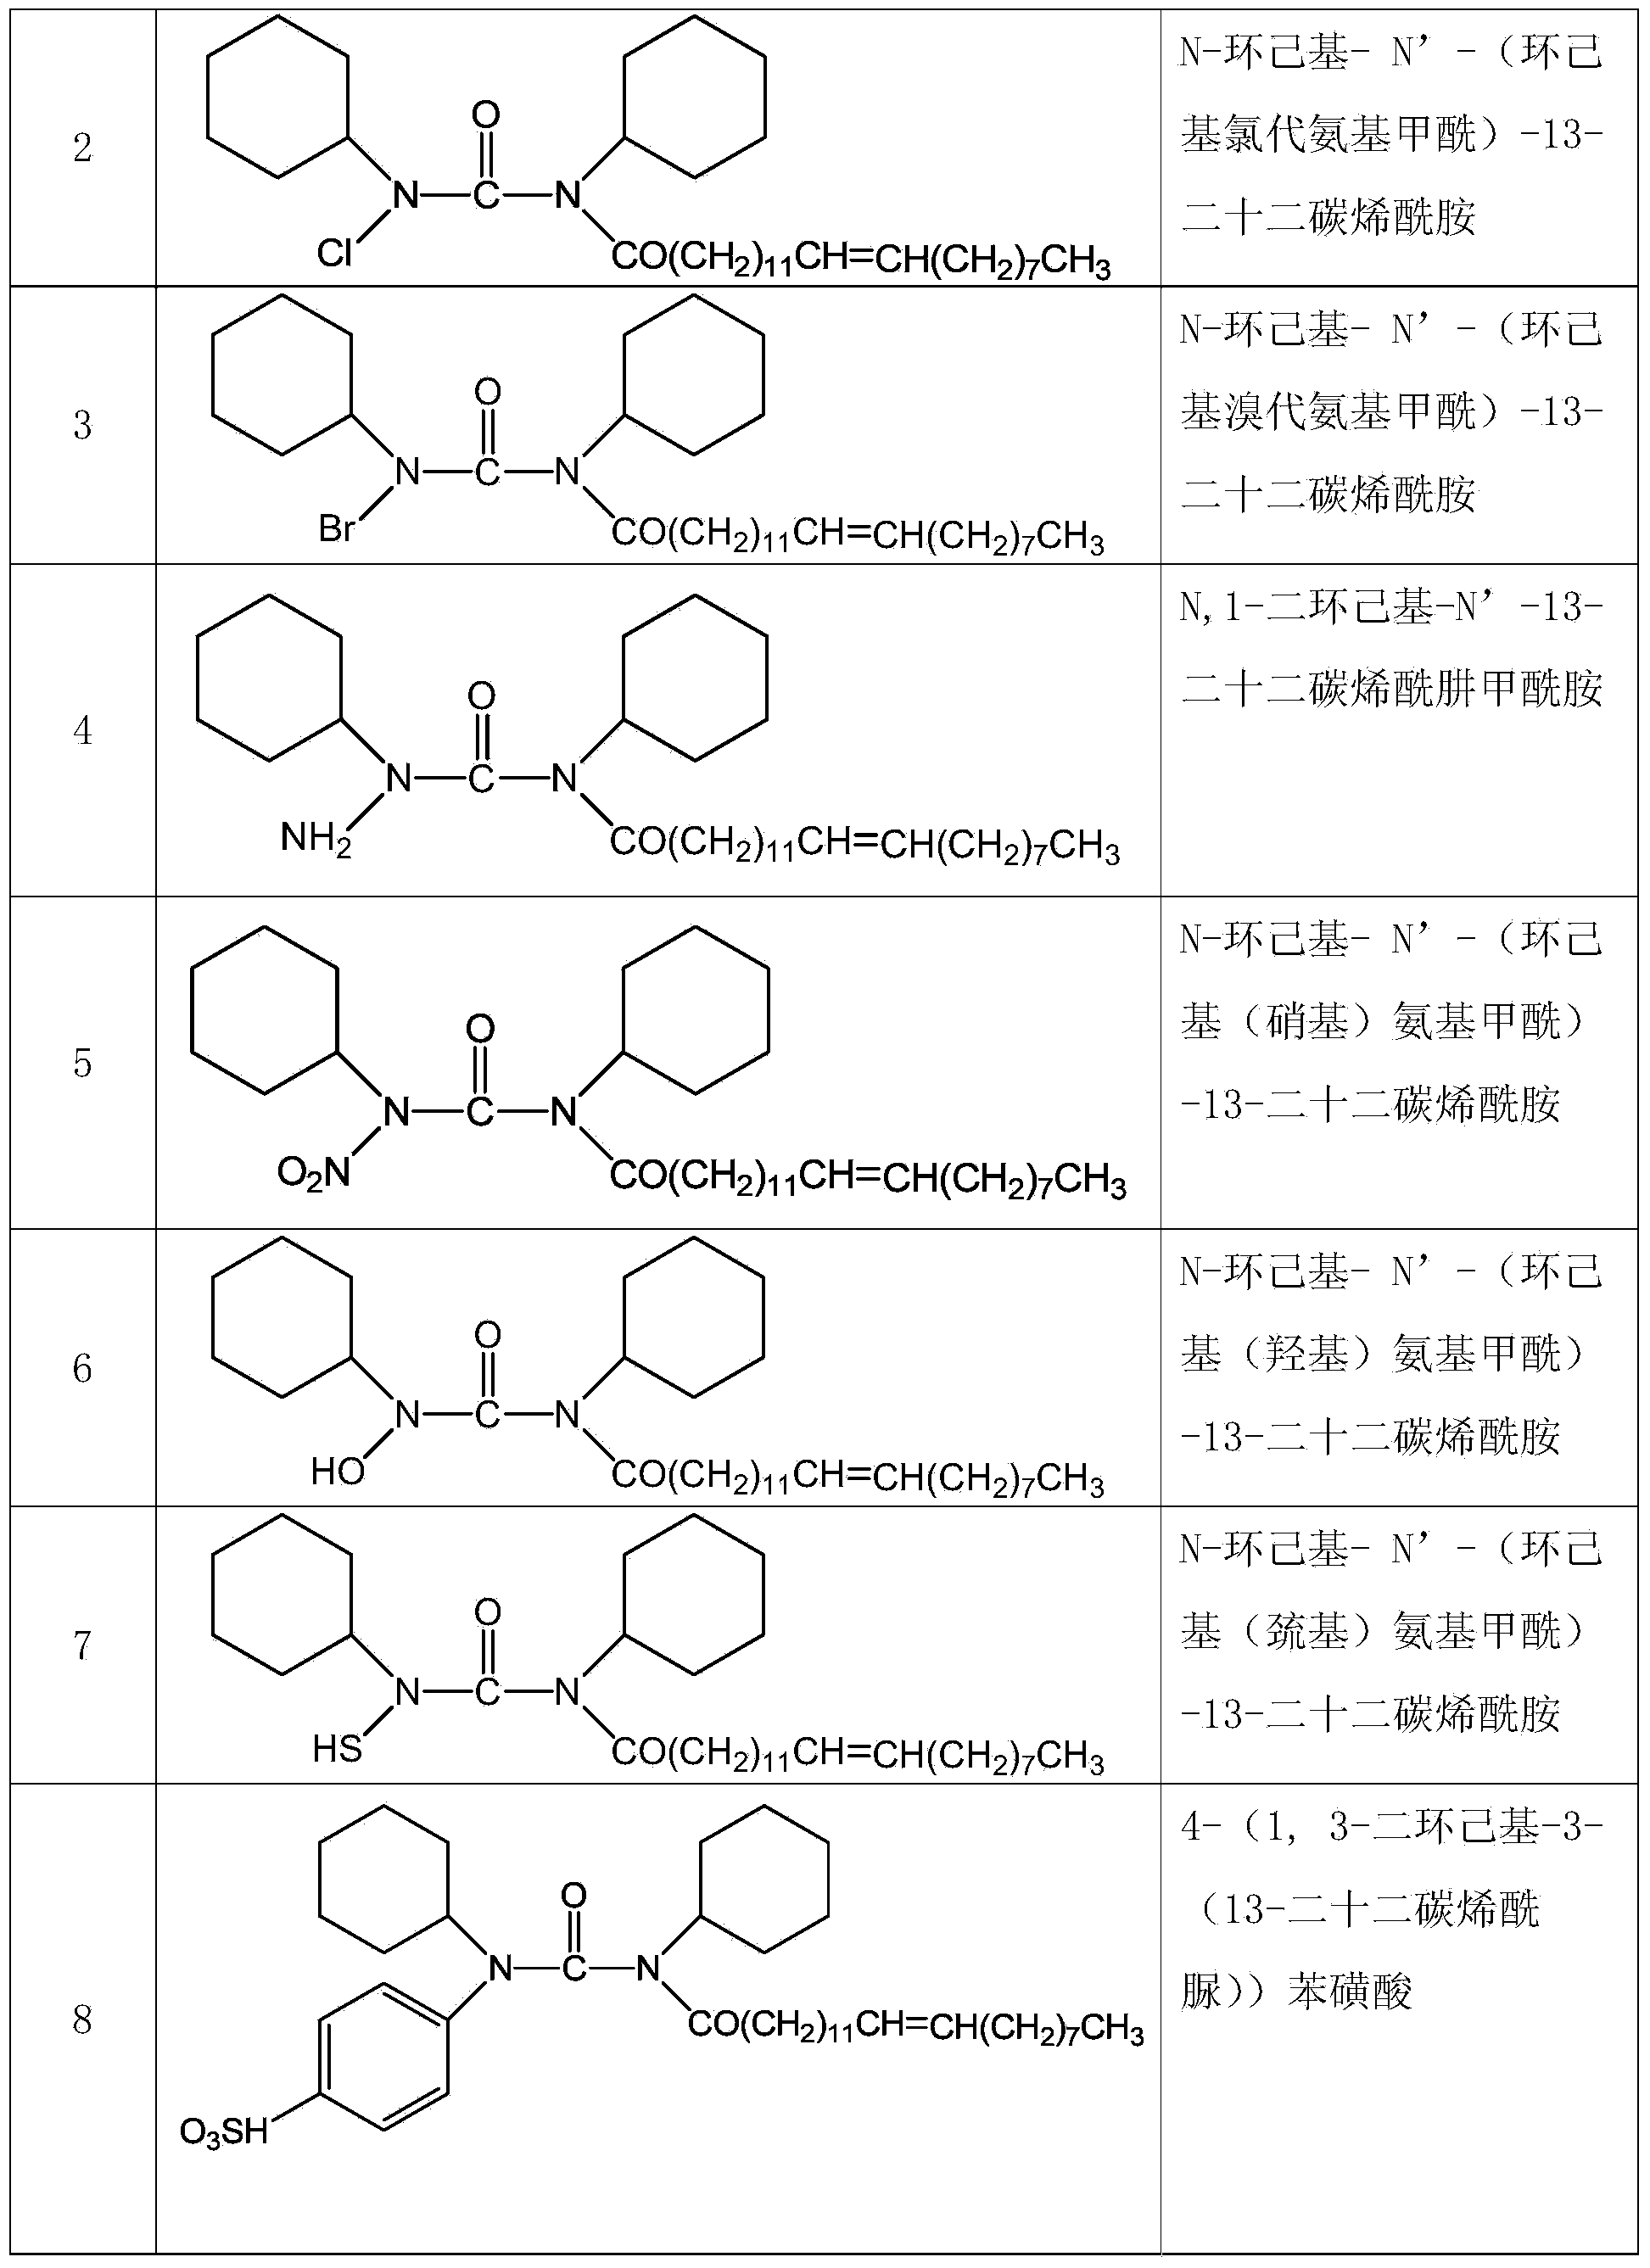 N,N'-dicyclohexyl-N-higher fatty acid ureide analogs and pharmaceutical application thereof